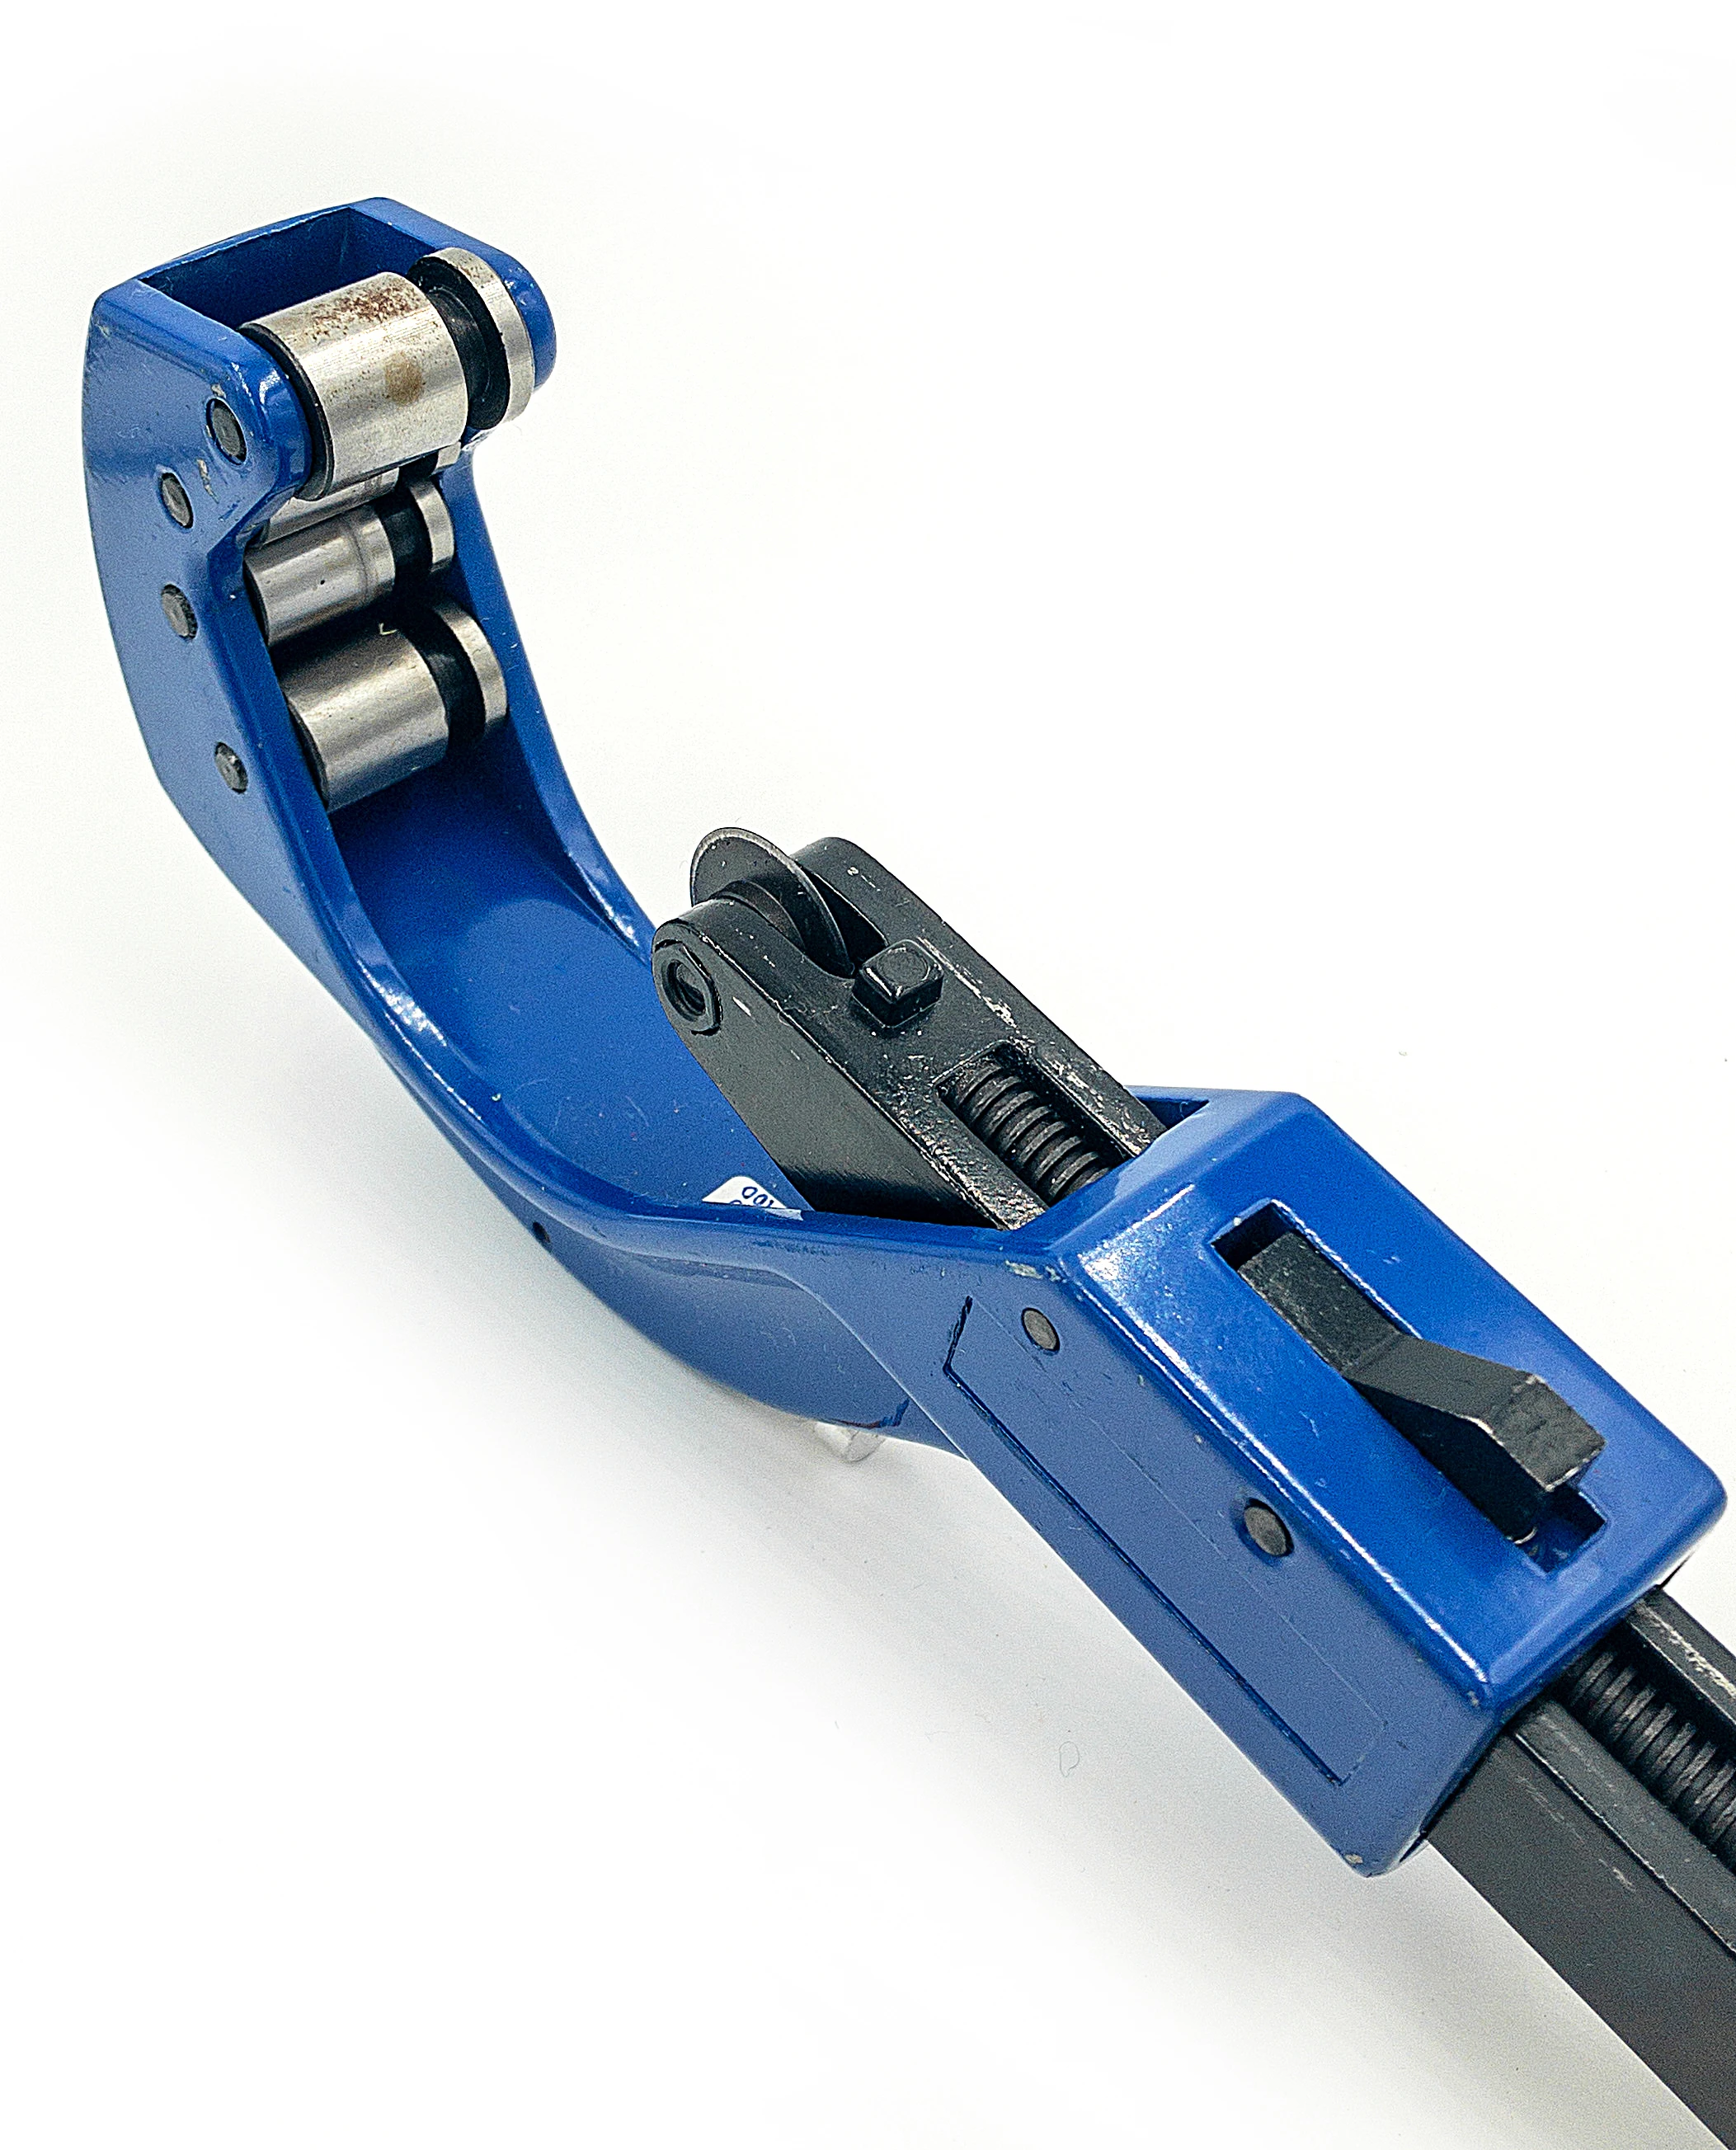 1/4" - 2-5/8" (6-67mm) Taiwan Made Zip Action Tube Cutter, Pipe Cutter